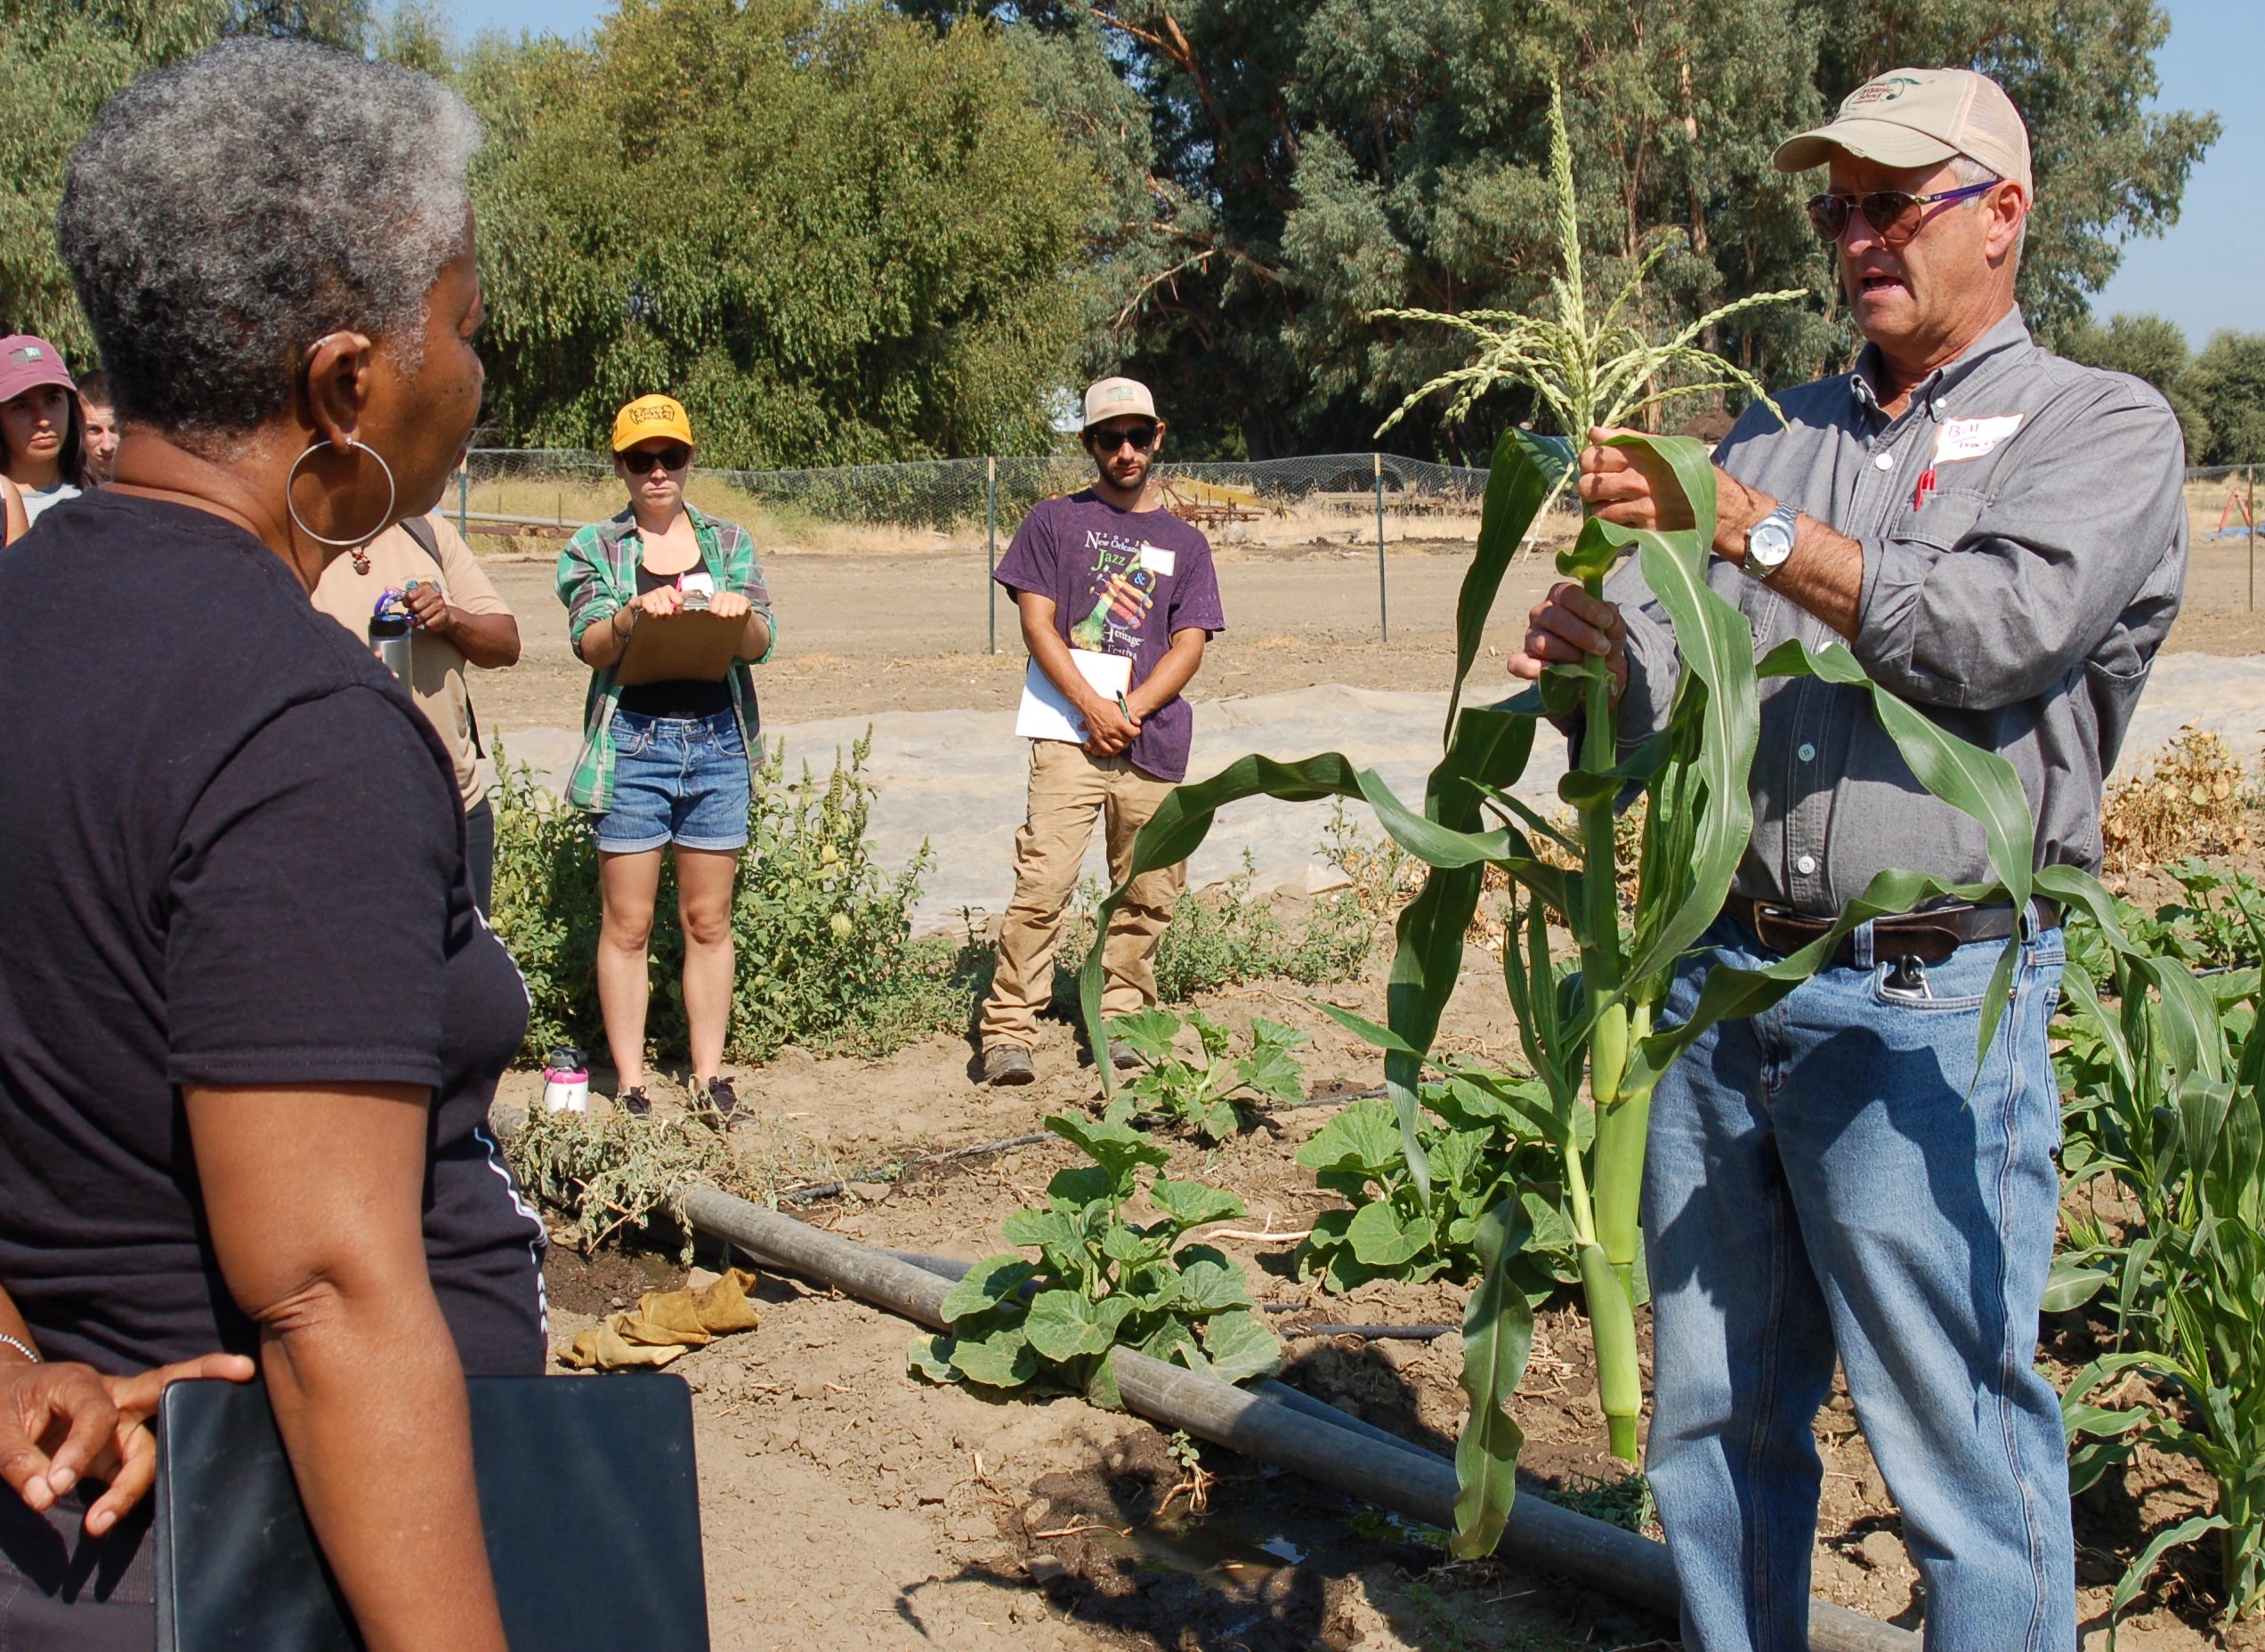 Dr. Bill Tracy from the University of Wisconsin - Madison discusses sweet corn at a University of California - Davis seed intensive hosted by Organic Seed Alliance